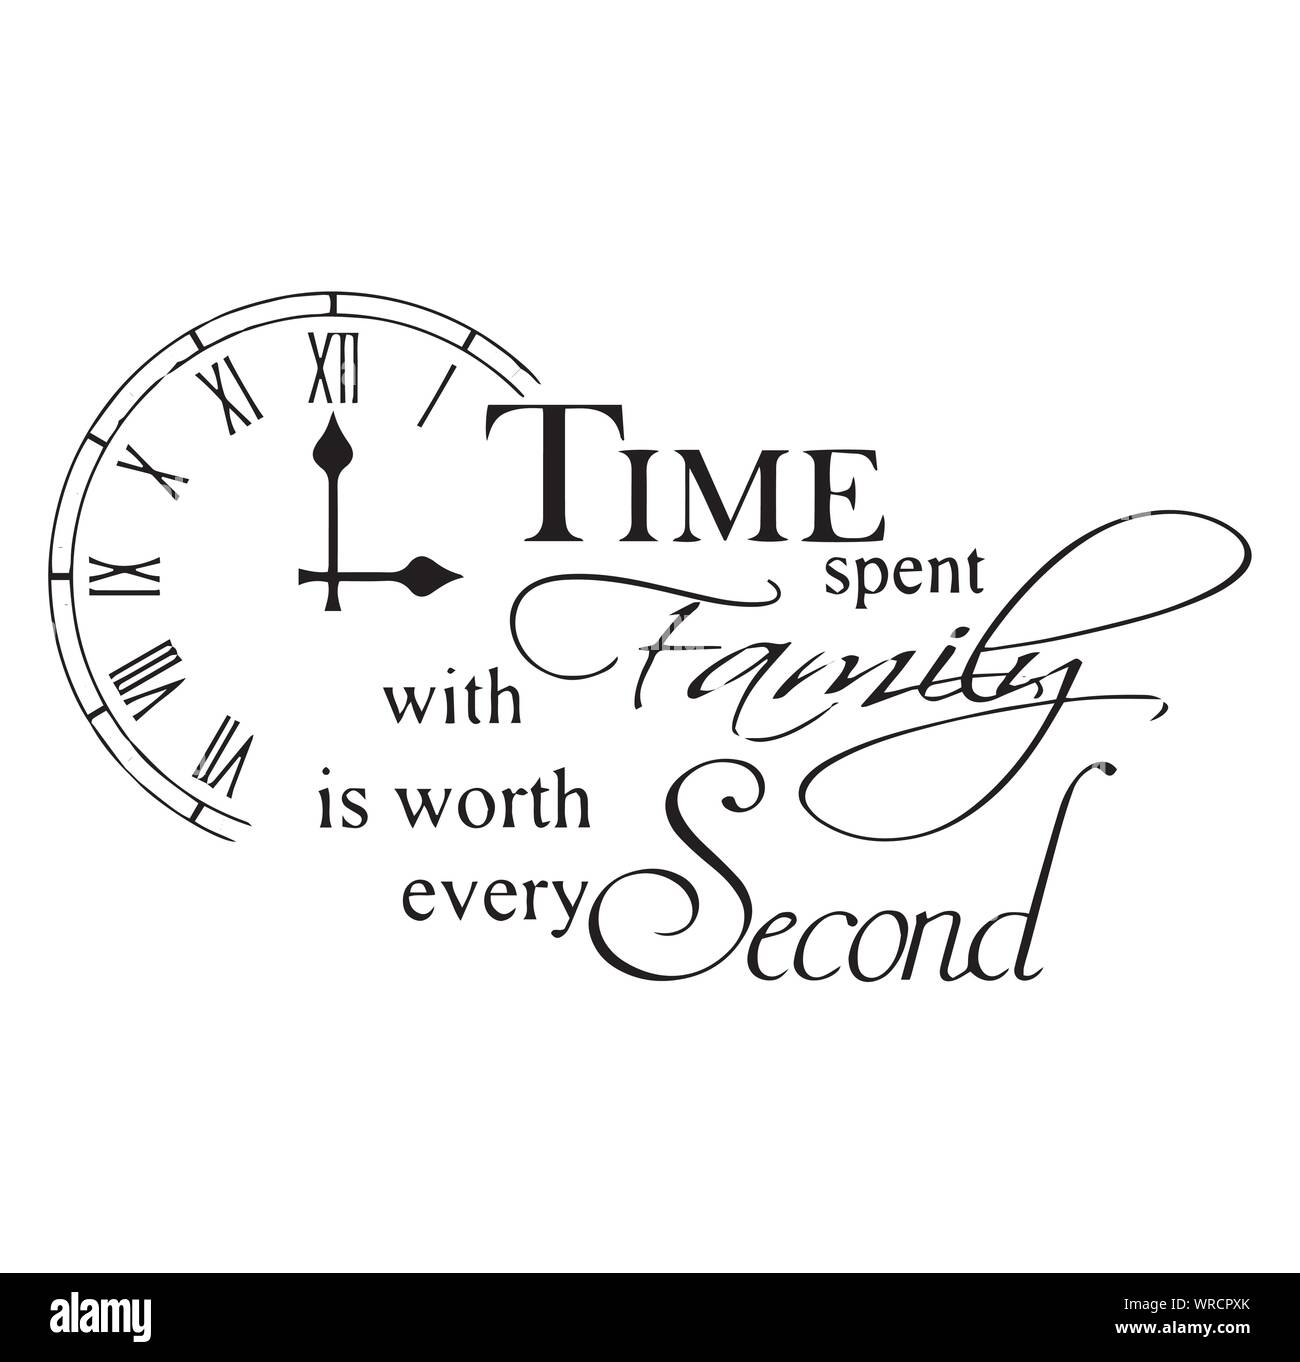 Download Time Spent With Family Is Worth Every Second Inspirational ...